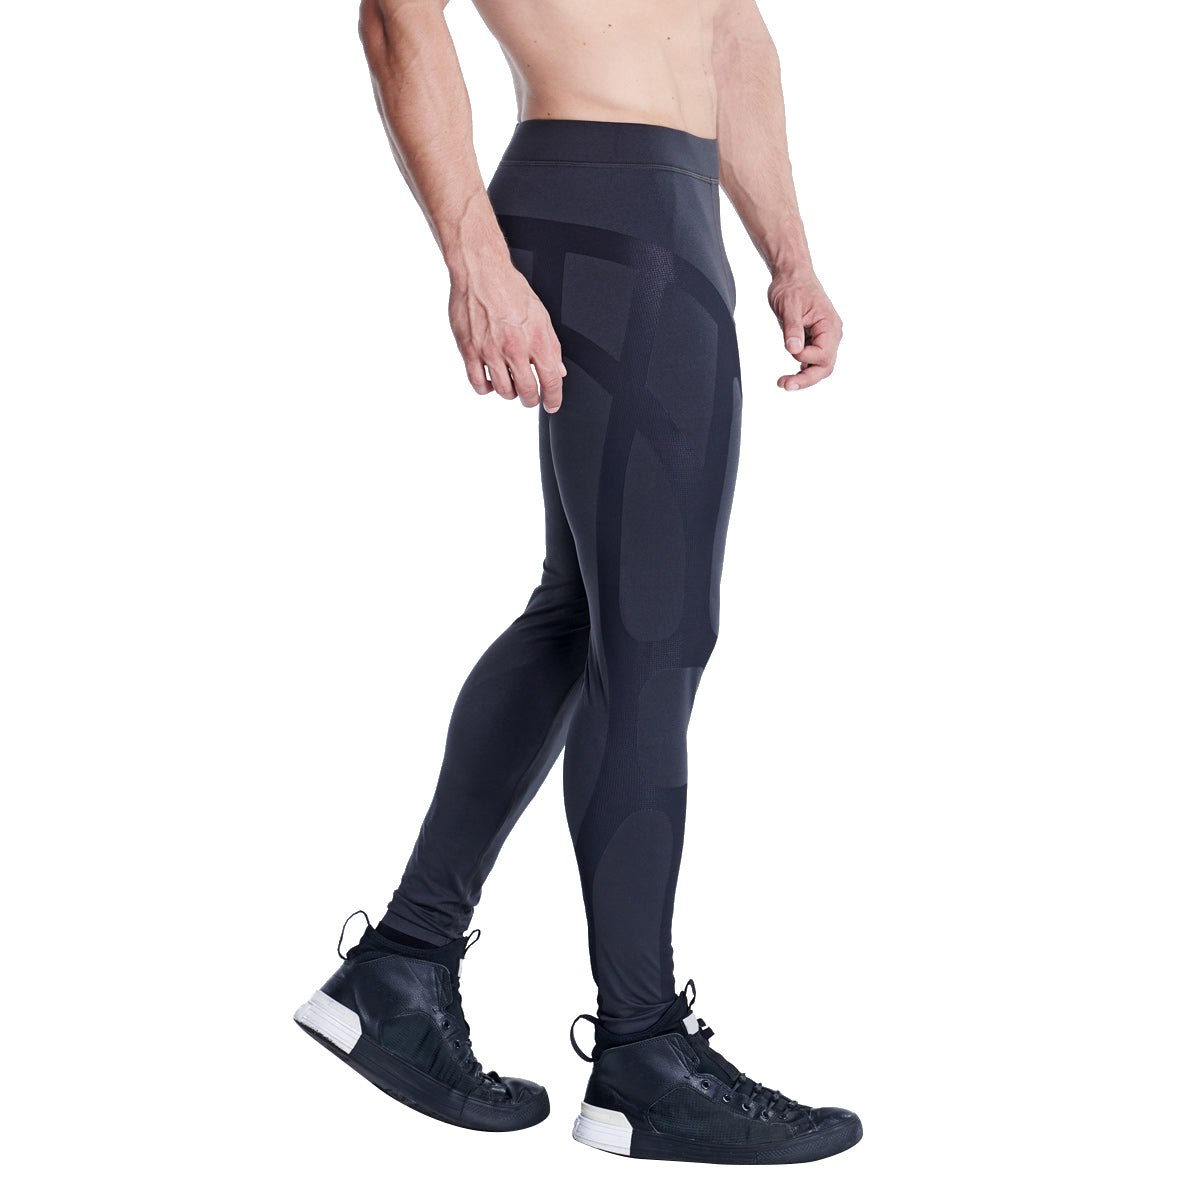 Supportive Compression for Men | Aesthetics – Gym Aesthetics